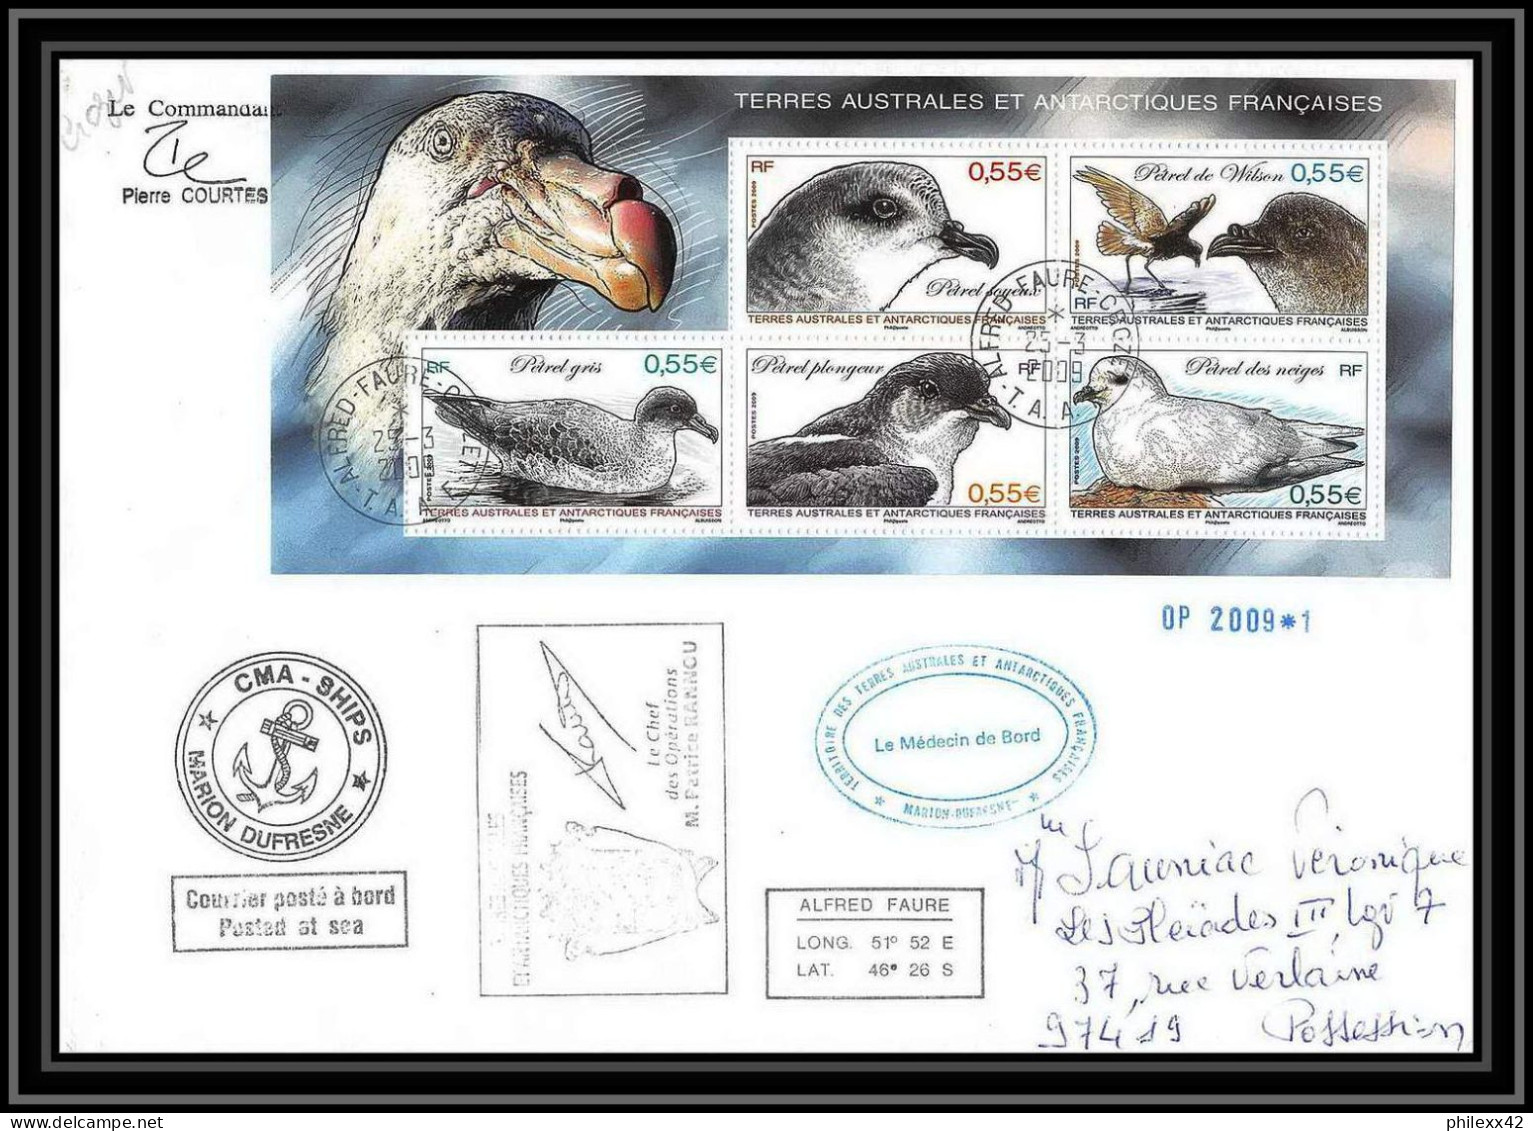 2888 Helilagon Dufresne Signé Signed OP 2009/1 Crozet BLOC N°22 25/3/2009 ANTARCTIC Terres Australes (taaf) Lettre Cover - Hélicoptères